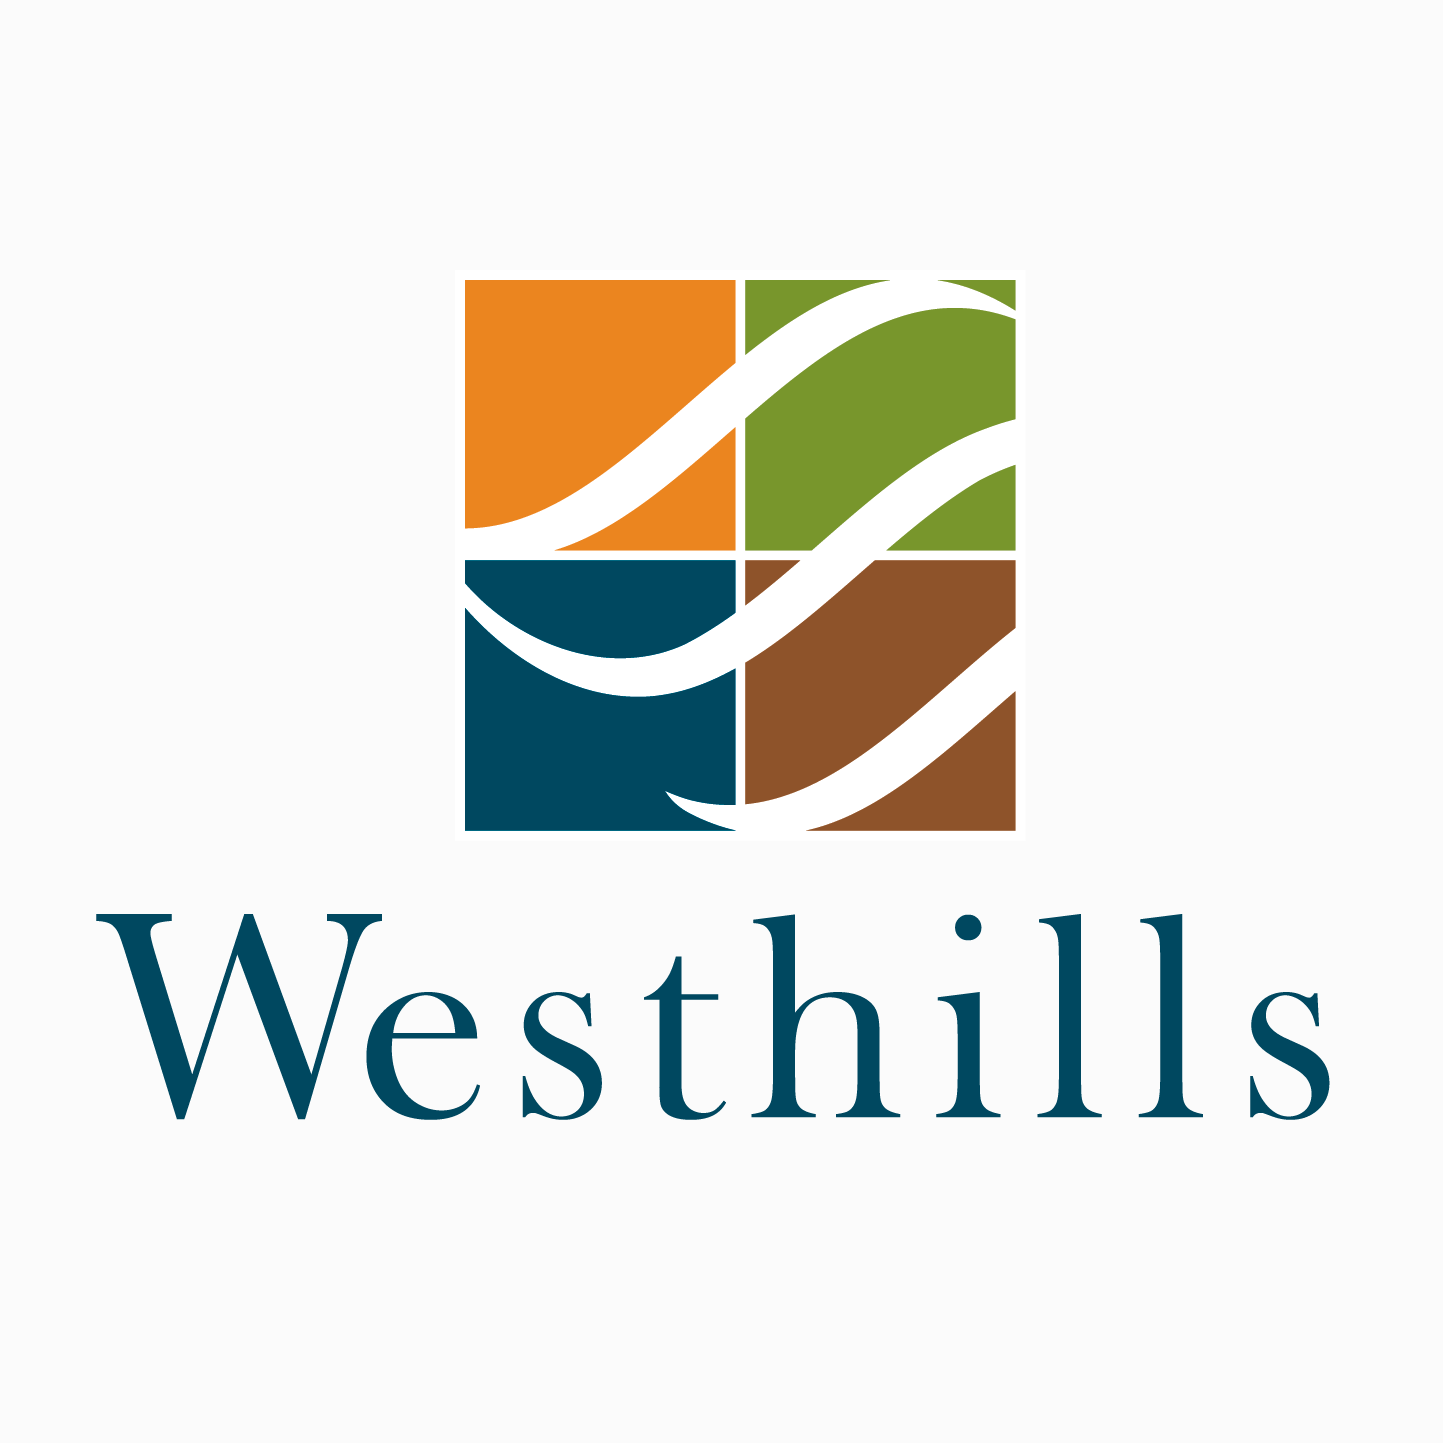 Westhills is a master planned community celebrating the values of environmental stewardship, sustainability and active living in a beautiful West Coast setting.